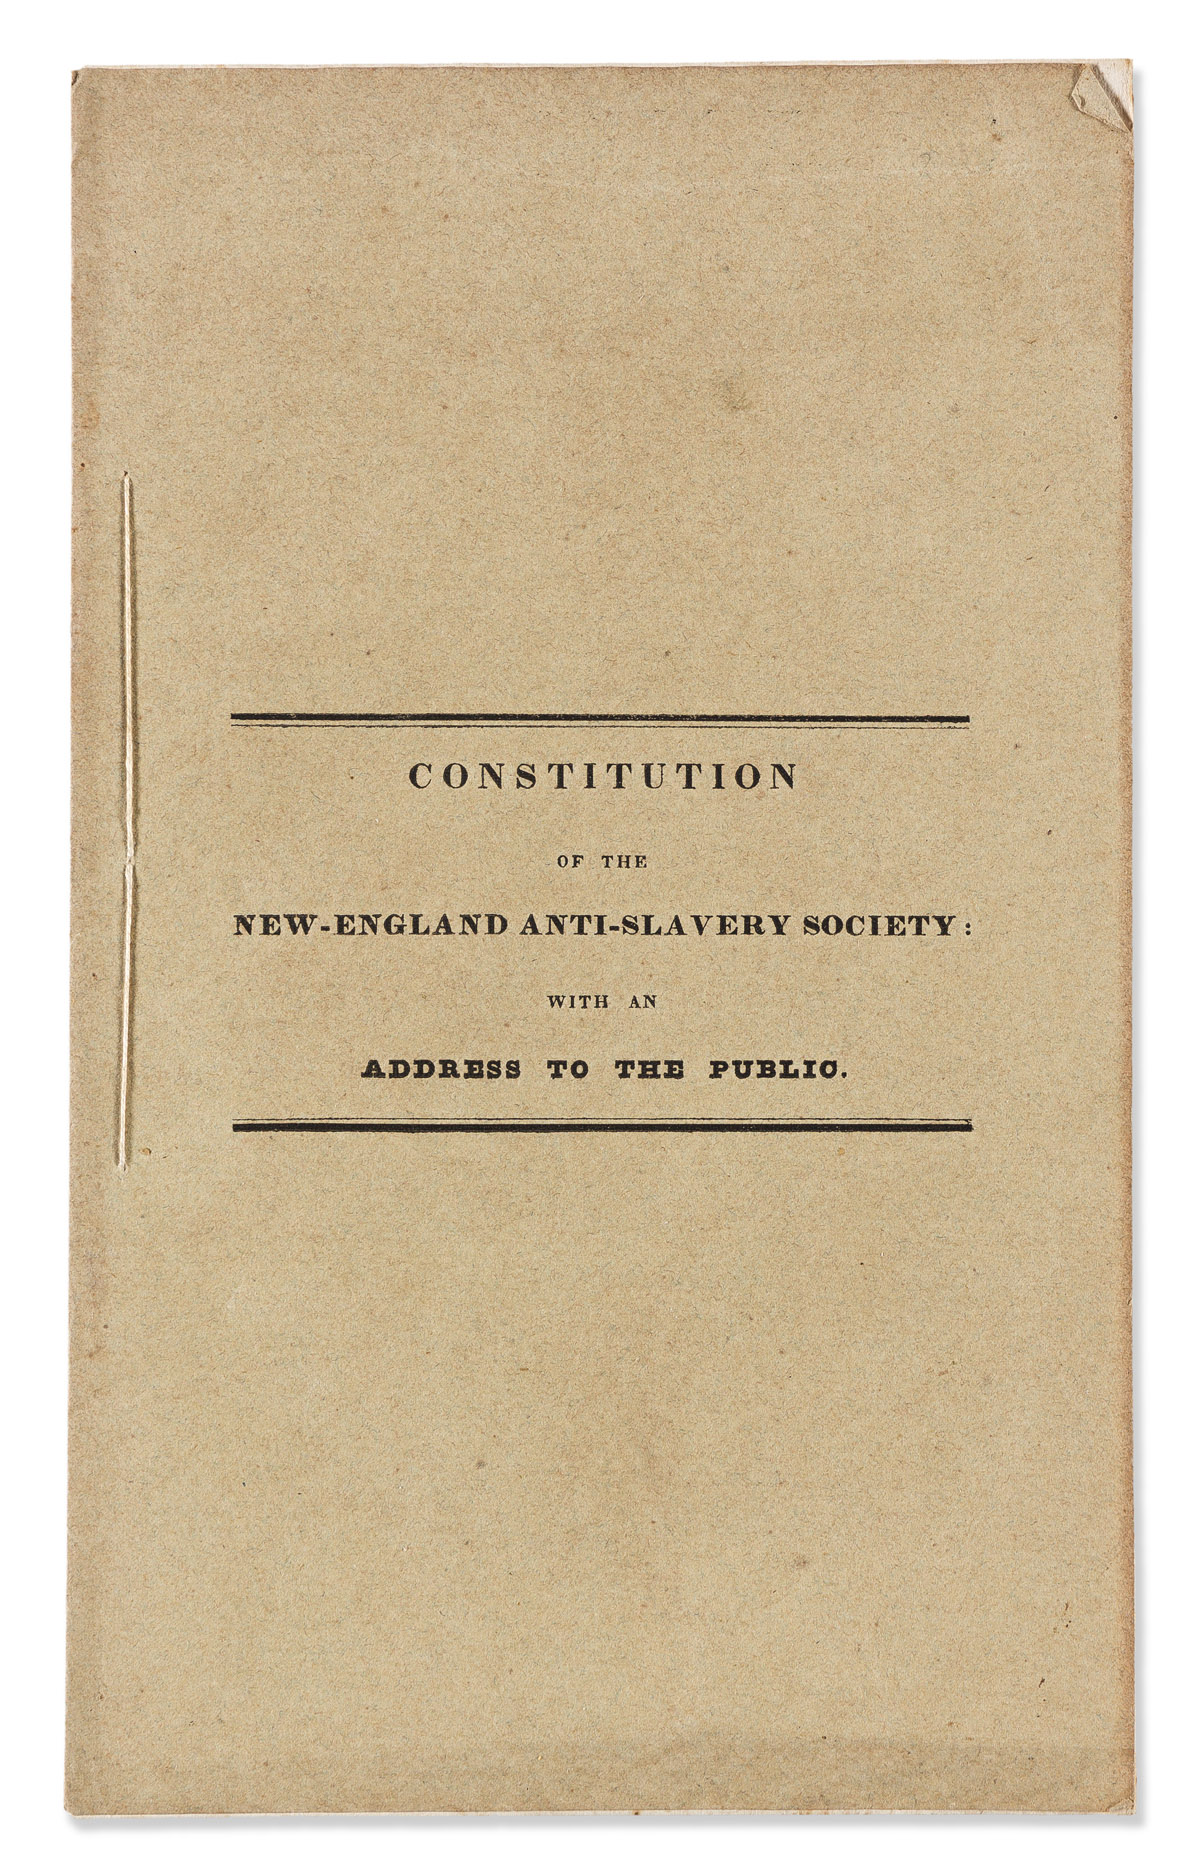 (SLAVERY & ABOLITION.) Constitution of the New-England Anti-Slavery Society, with an Address to the Public.